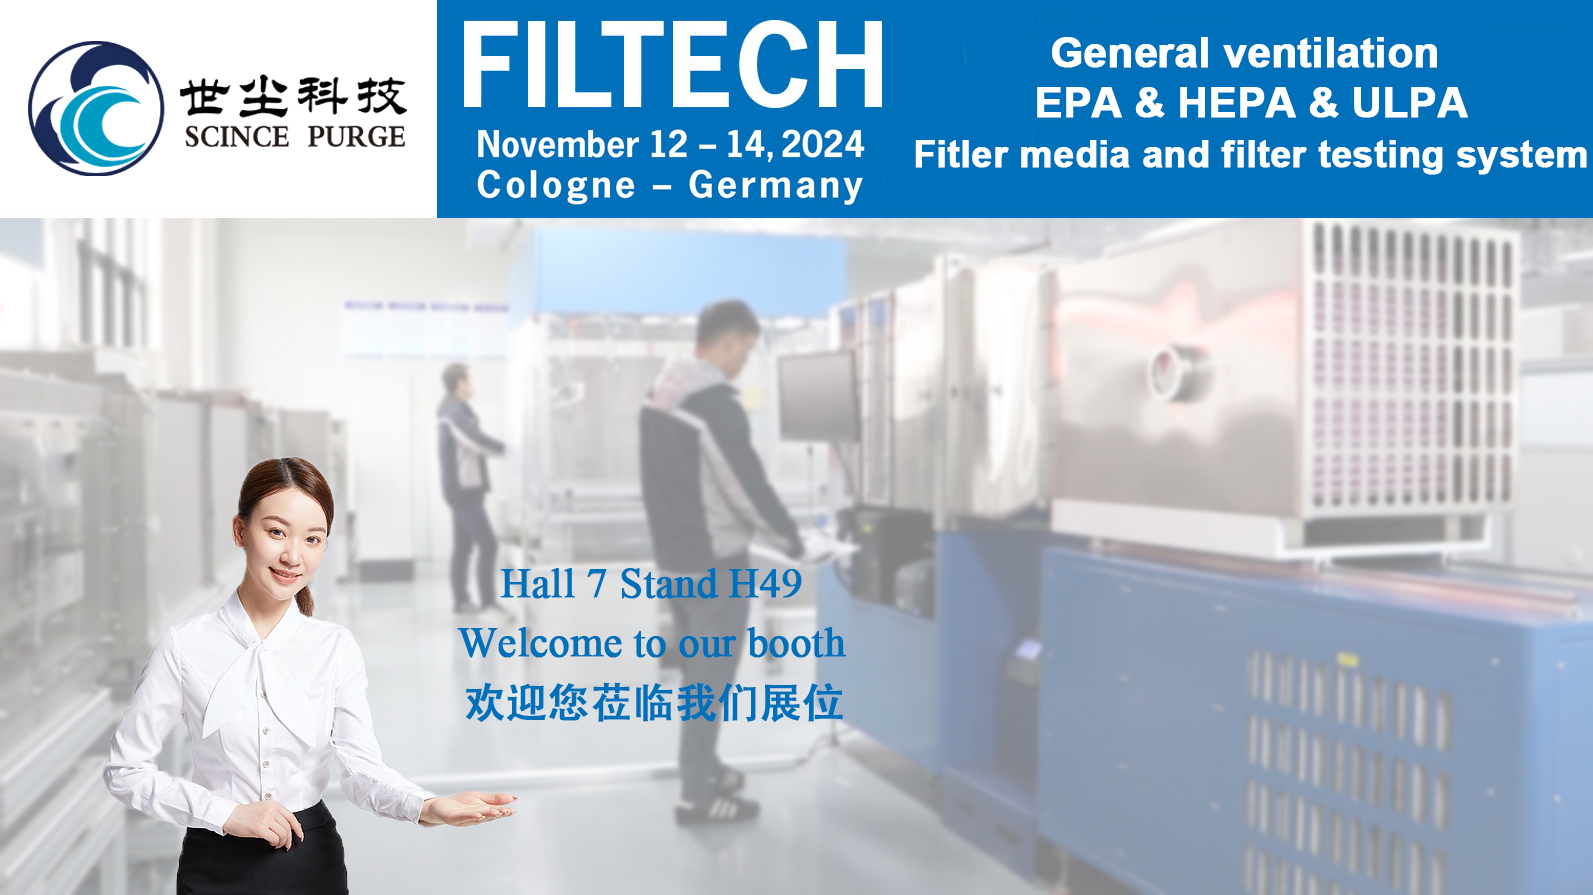 FILTECH, Nov. 12-14, 2024, Cologne Germany, we are waiting for you